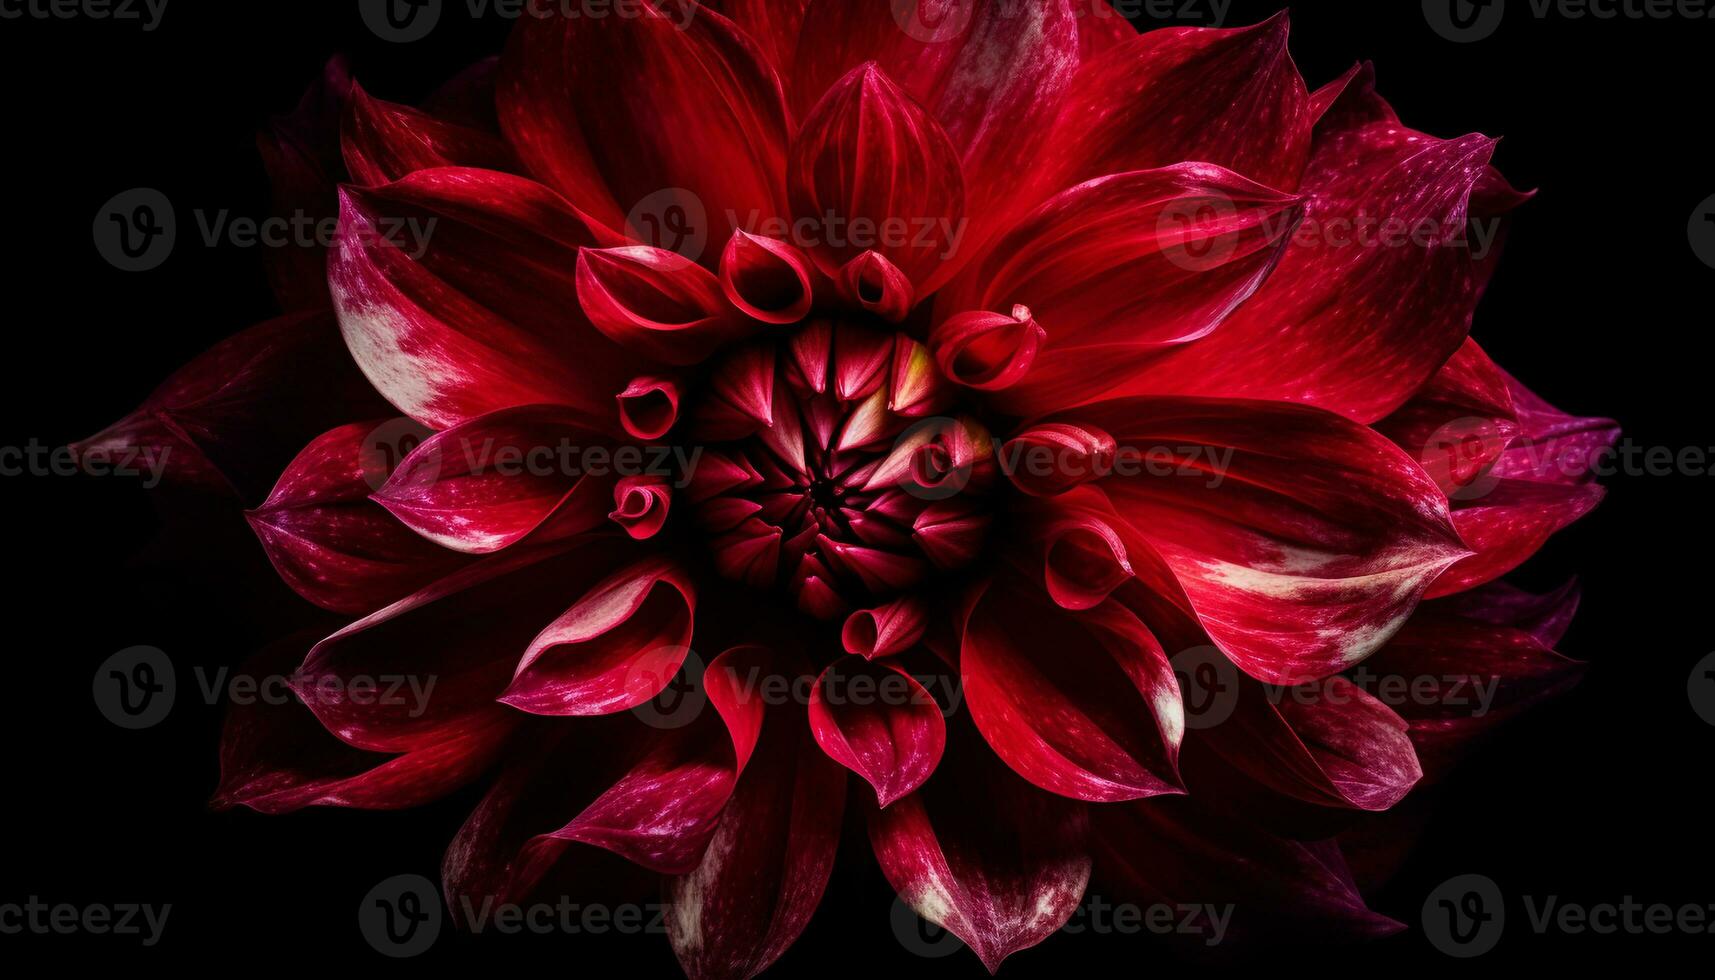 Vibrant colored petals in a close up of a dahlia flower generated by AI photo